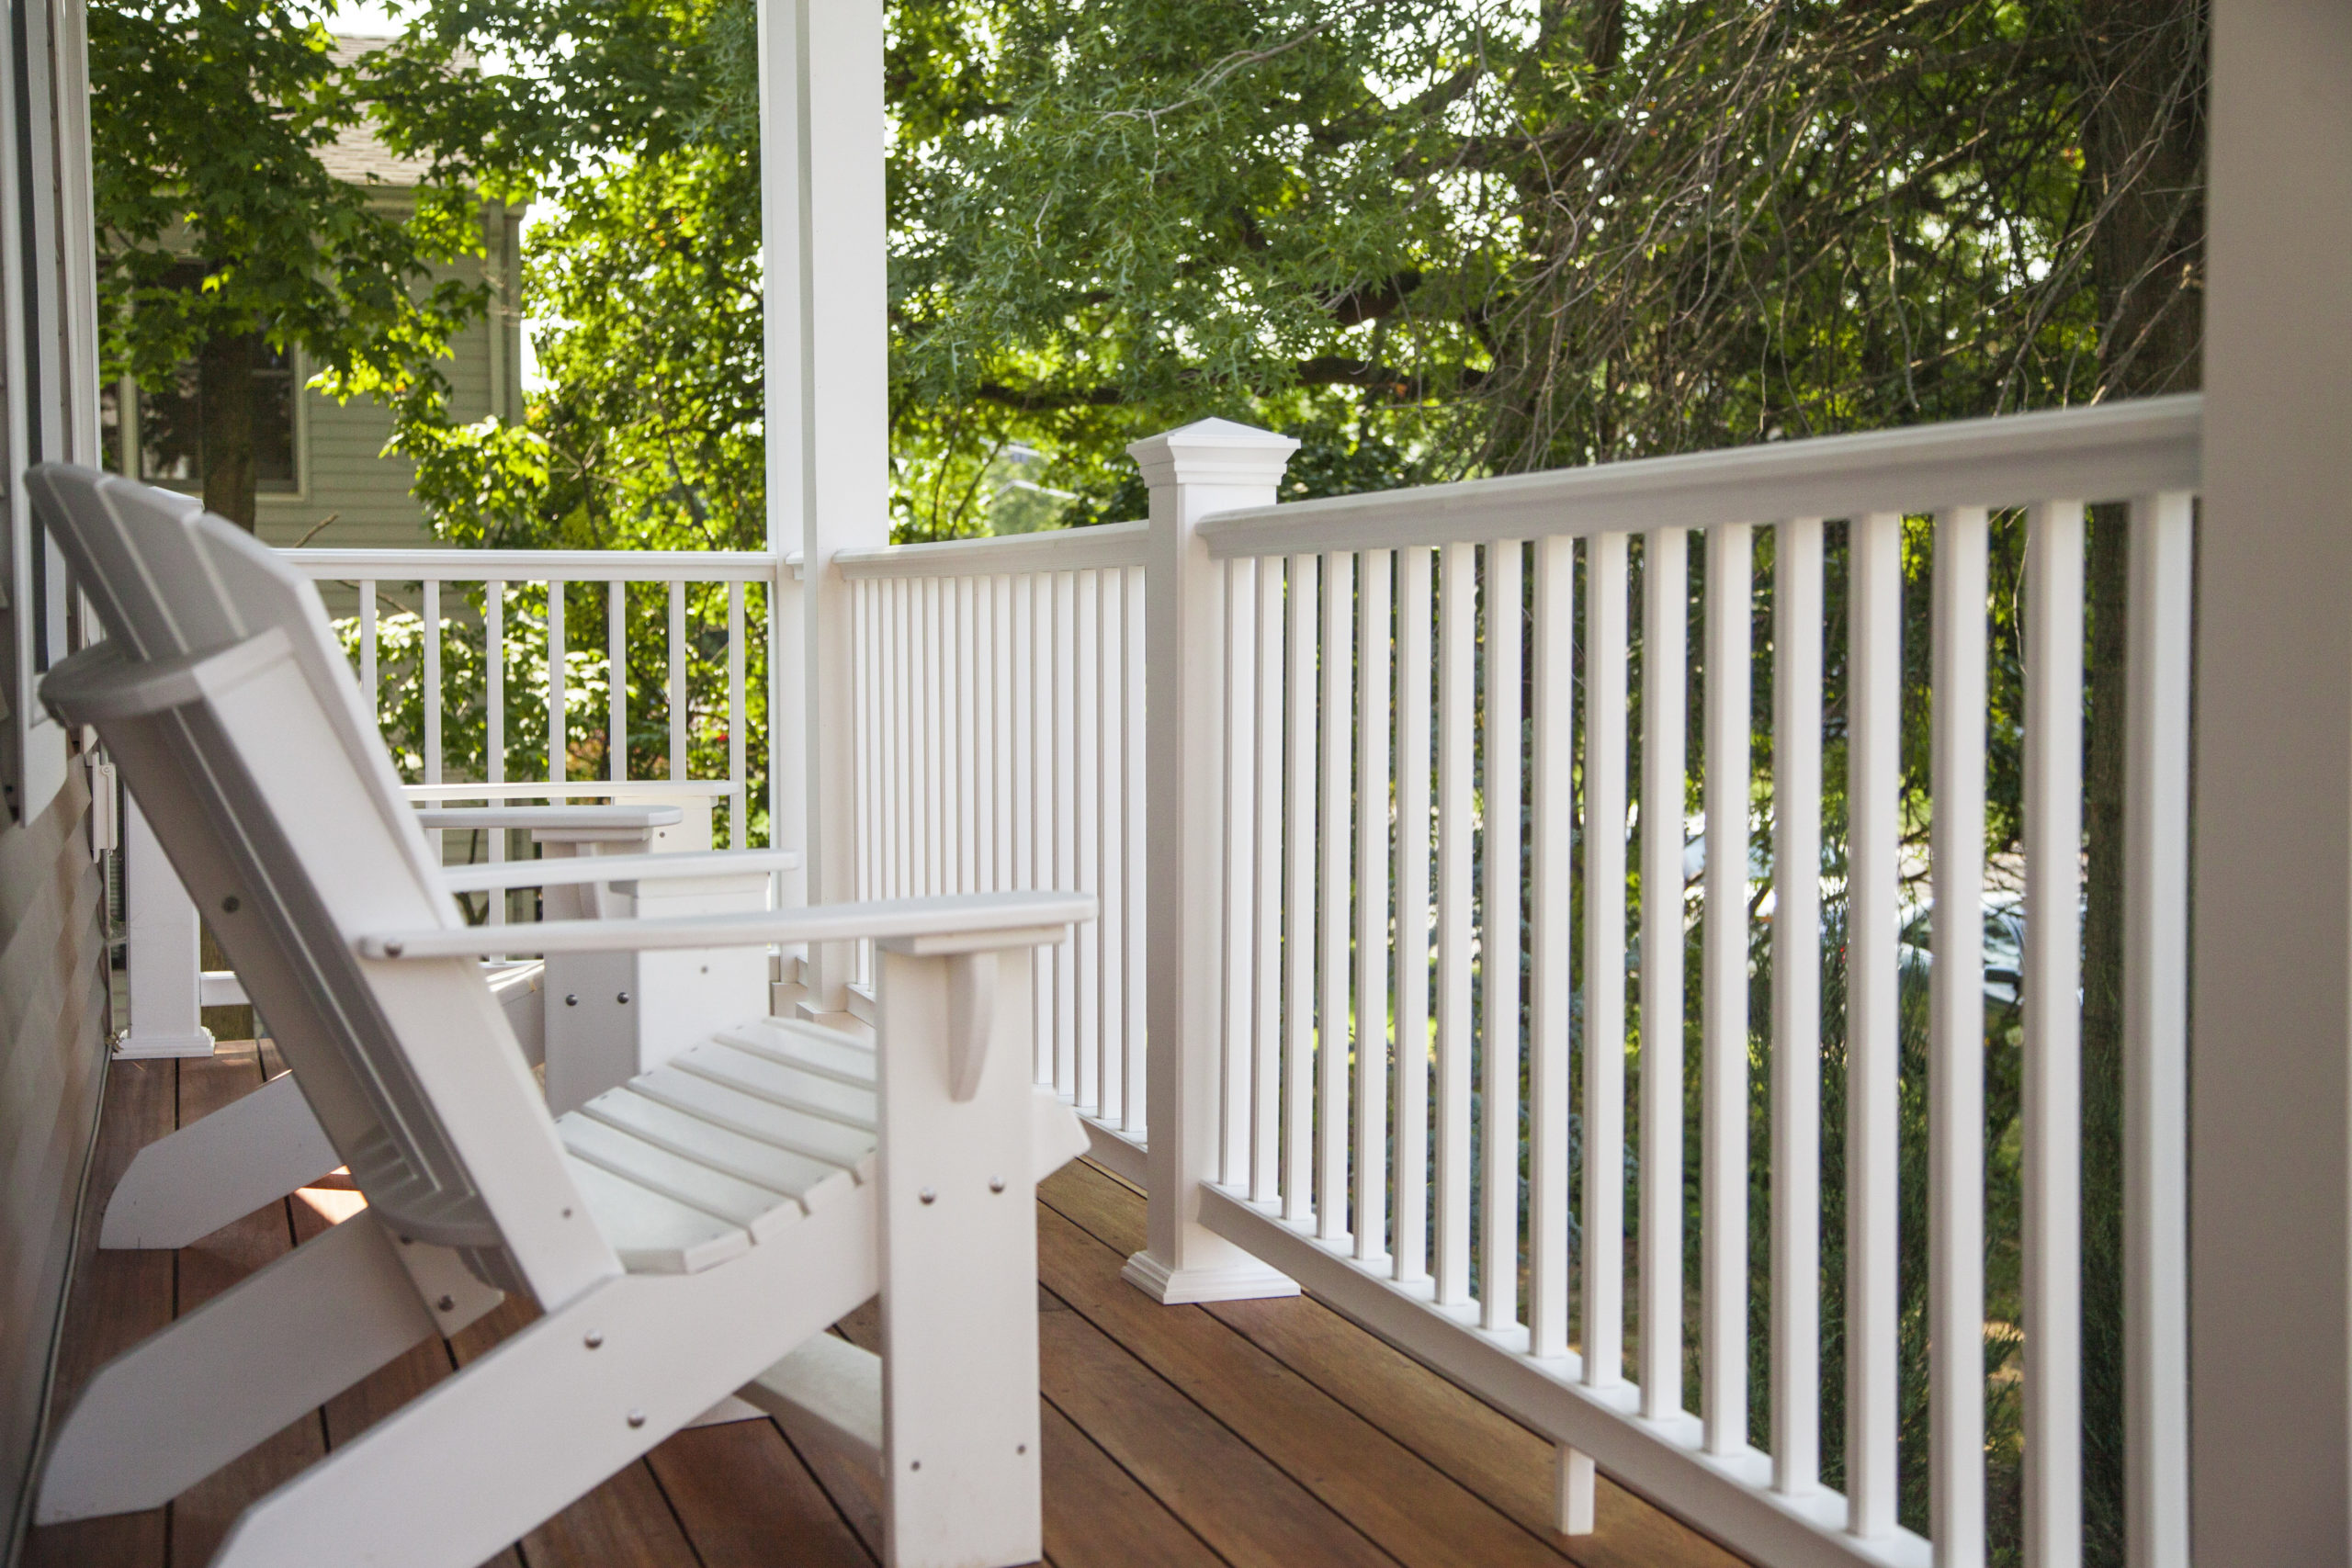 What are the differences between low maintenance and wood railings?